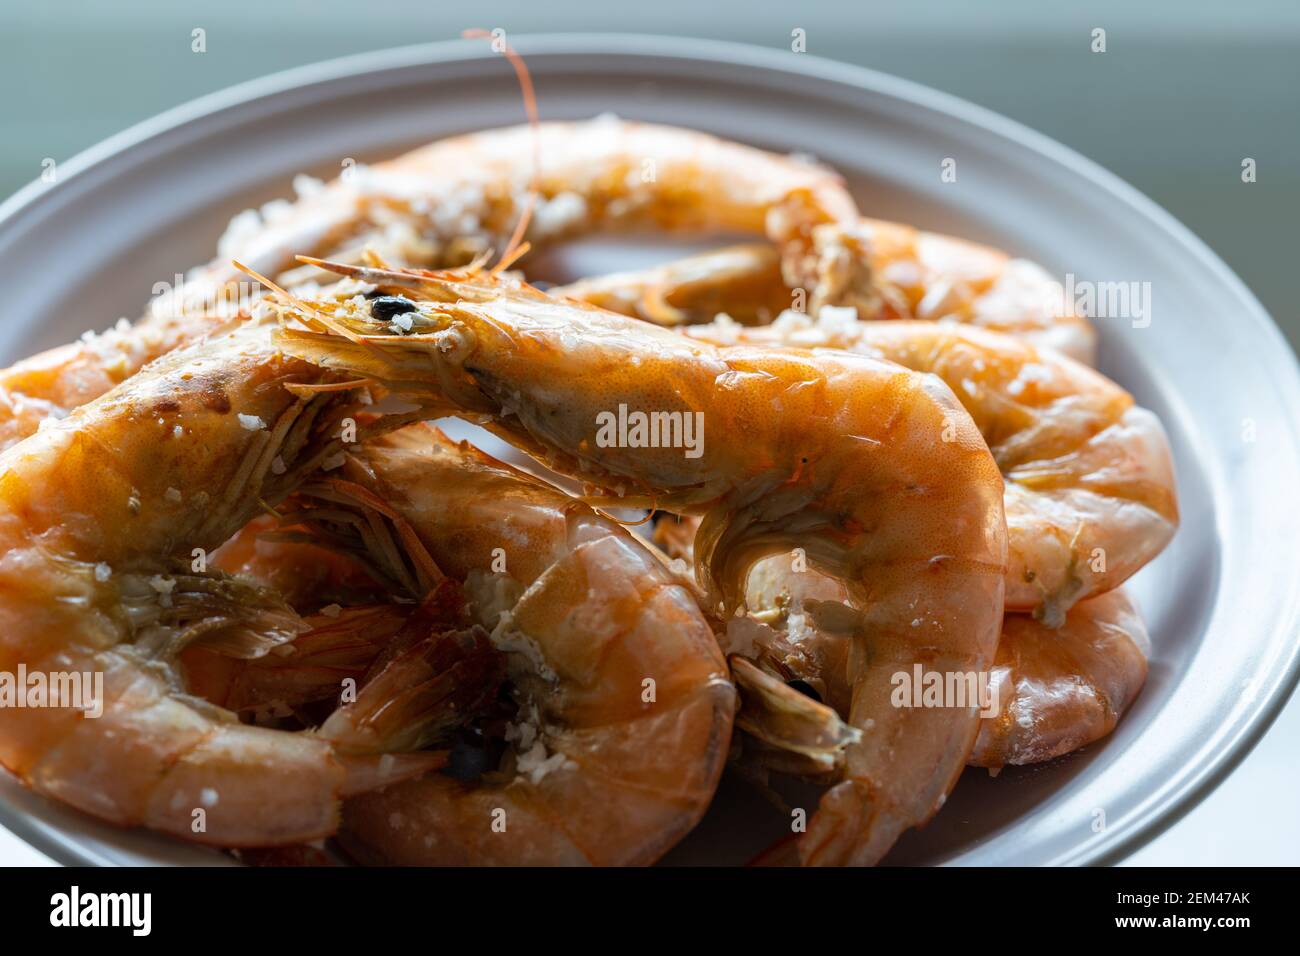 Home-cooked, salted and steamed shrimp. Stock Photo